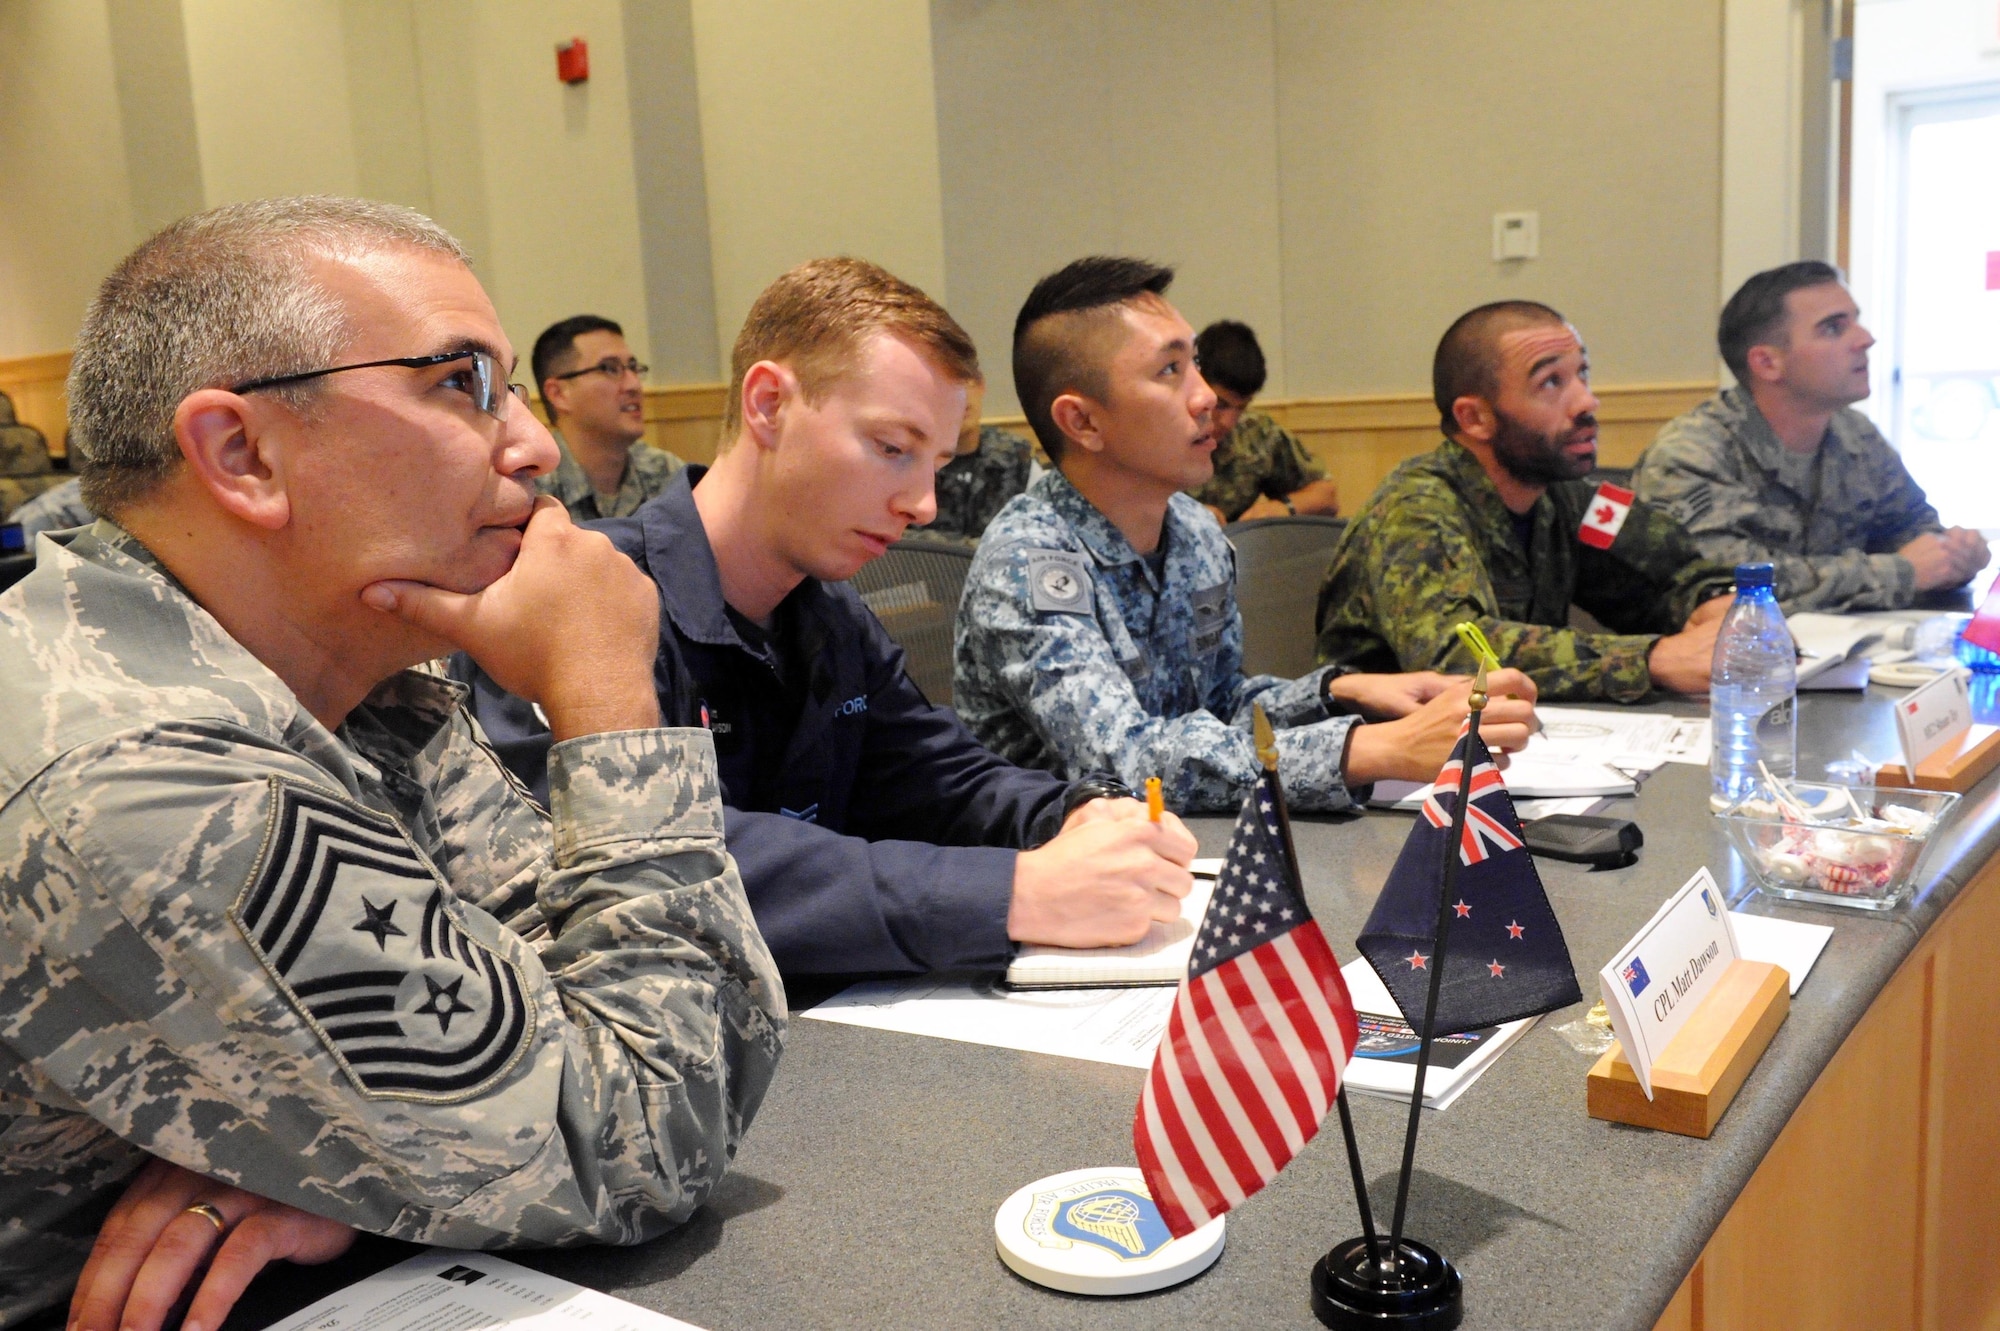 U.S. Air Force Chief Master Sgt. Timothy Horn (left), the Air University command chief at Maxwell Air Force Base, Ala., participates in a brain teaser during the first U.S. led Pacific Rim Junior Enlisted Leadership Forum (JELF) at Joint Base Pearl Harbor-Hickam, Hawaii, Aug 10. 2016. A U.S. Soldier and Airmen from Australia, Cambodia, Canada, Indonesia, Japan, Maldives, Mongolia, New Zealand, Philippines, Singapore, and the United States came together during the JELF to share experiences and to gain valuable insight on leadership development in order to grow as tomorrow's senior enlisted leaders.  (U.S. Air Force photo by Staff Sgt. Kamaile Chan)